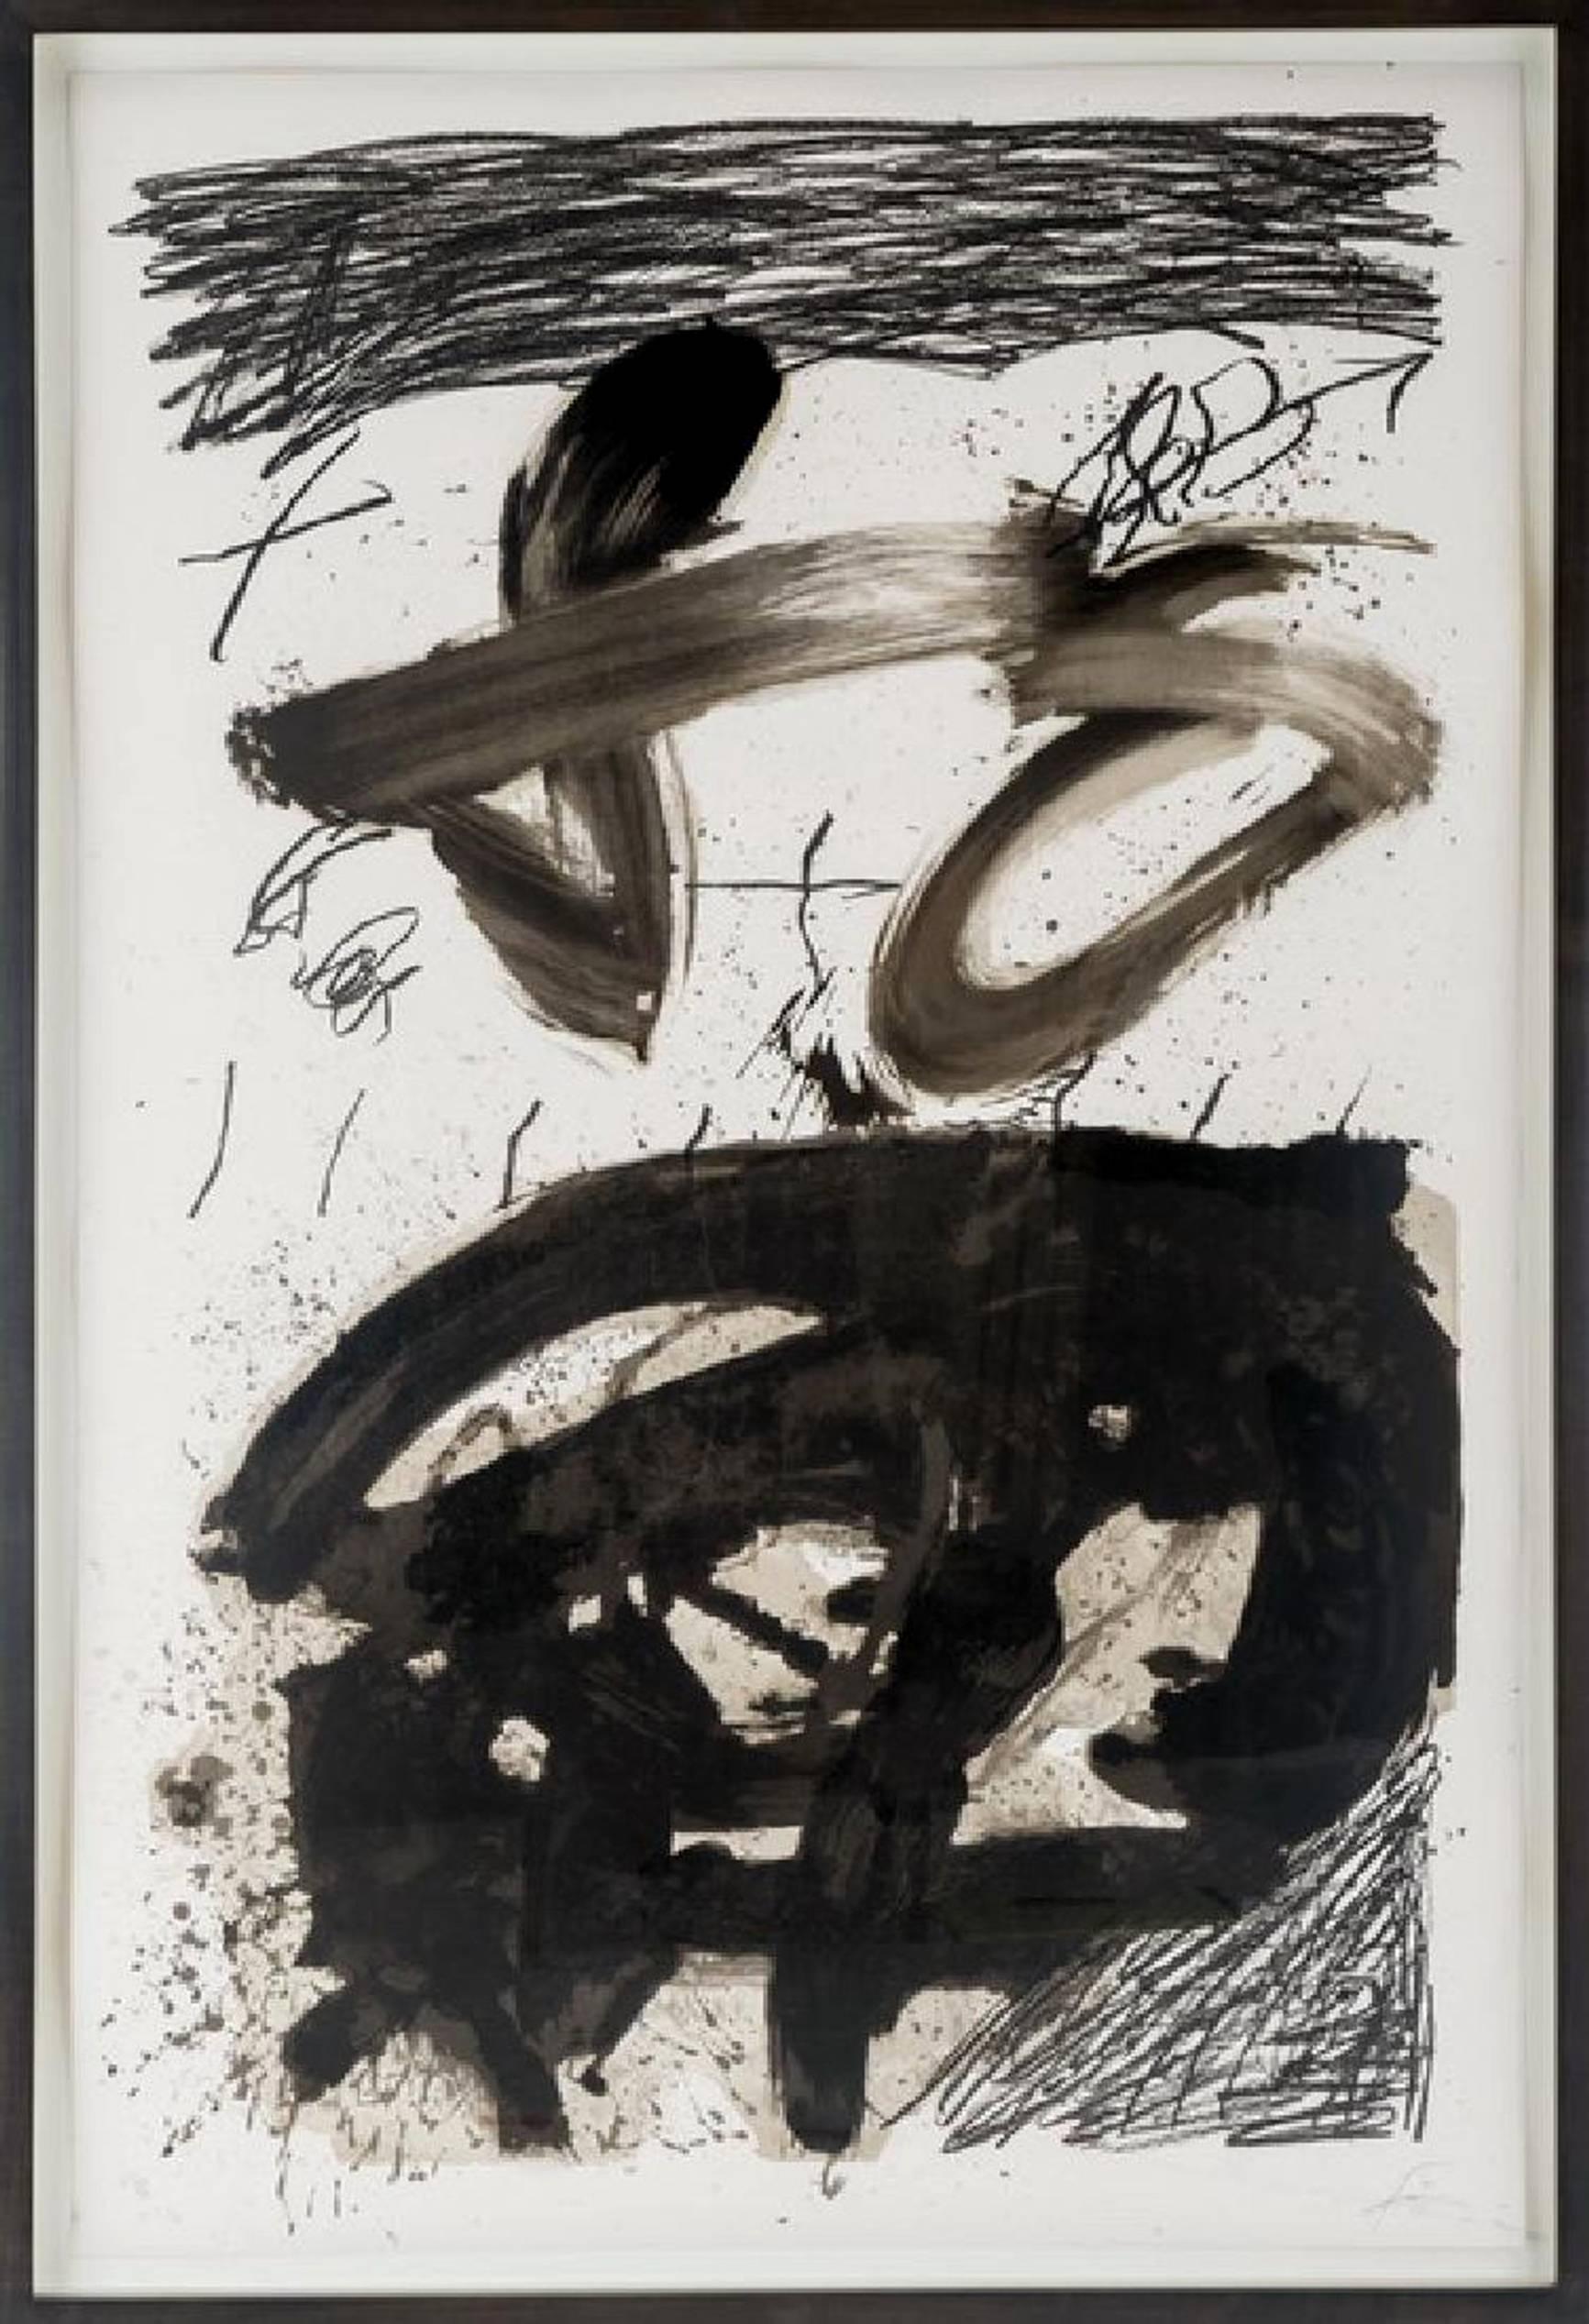 Calligraphique - Gray Abstract Print by Antoni Tàpies